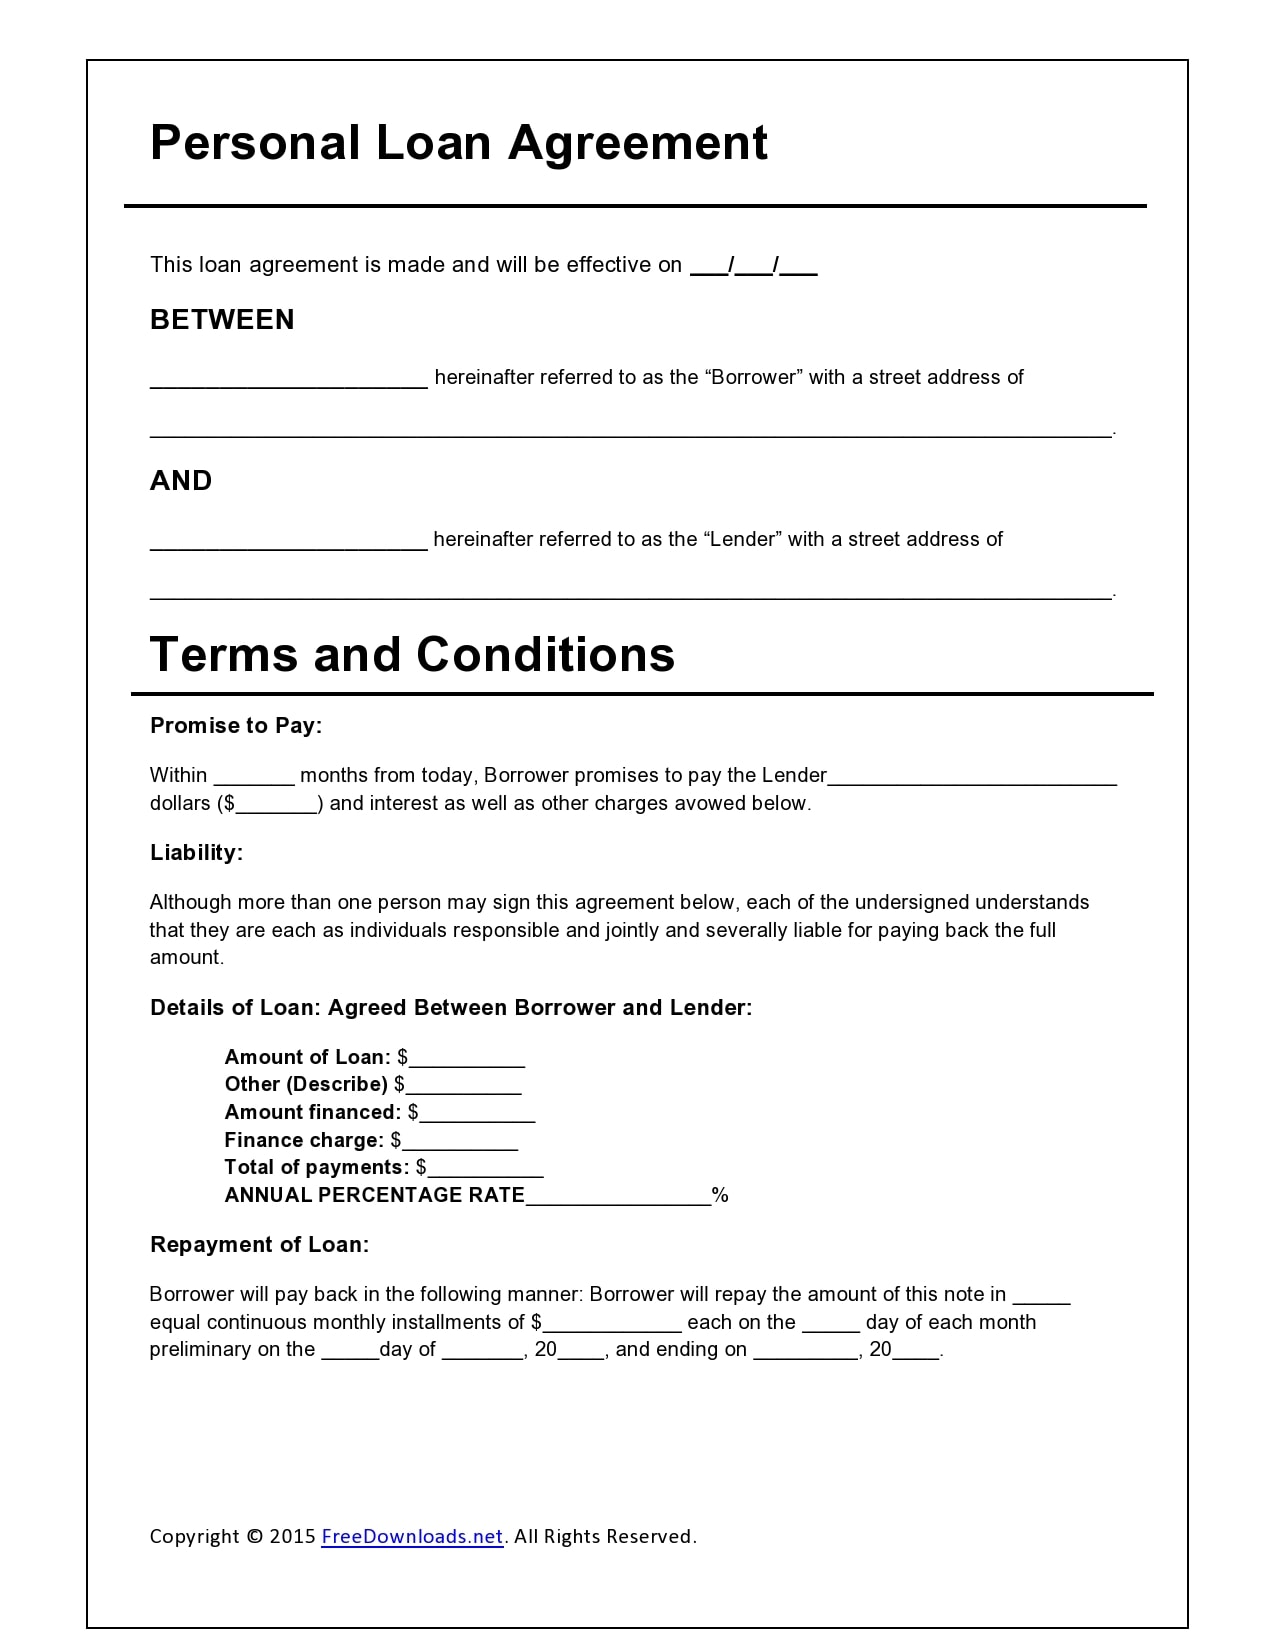 24 Simple Family Loan Agreement Templates (24% Free)